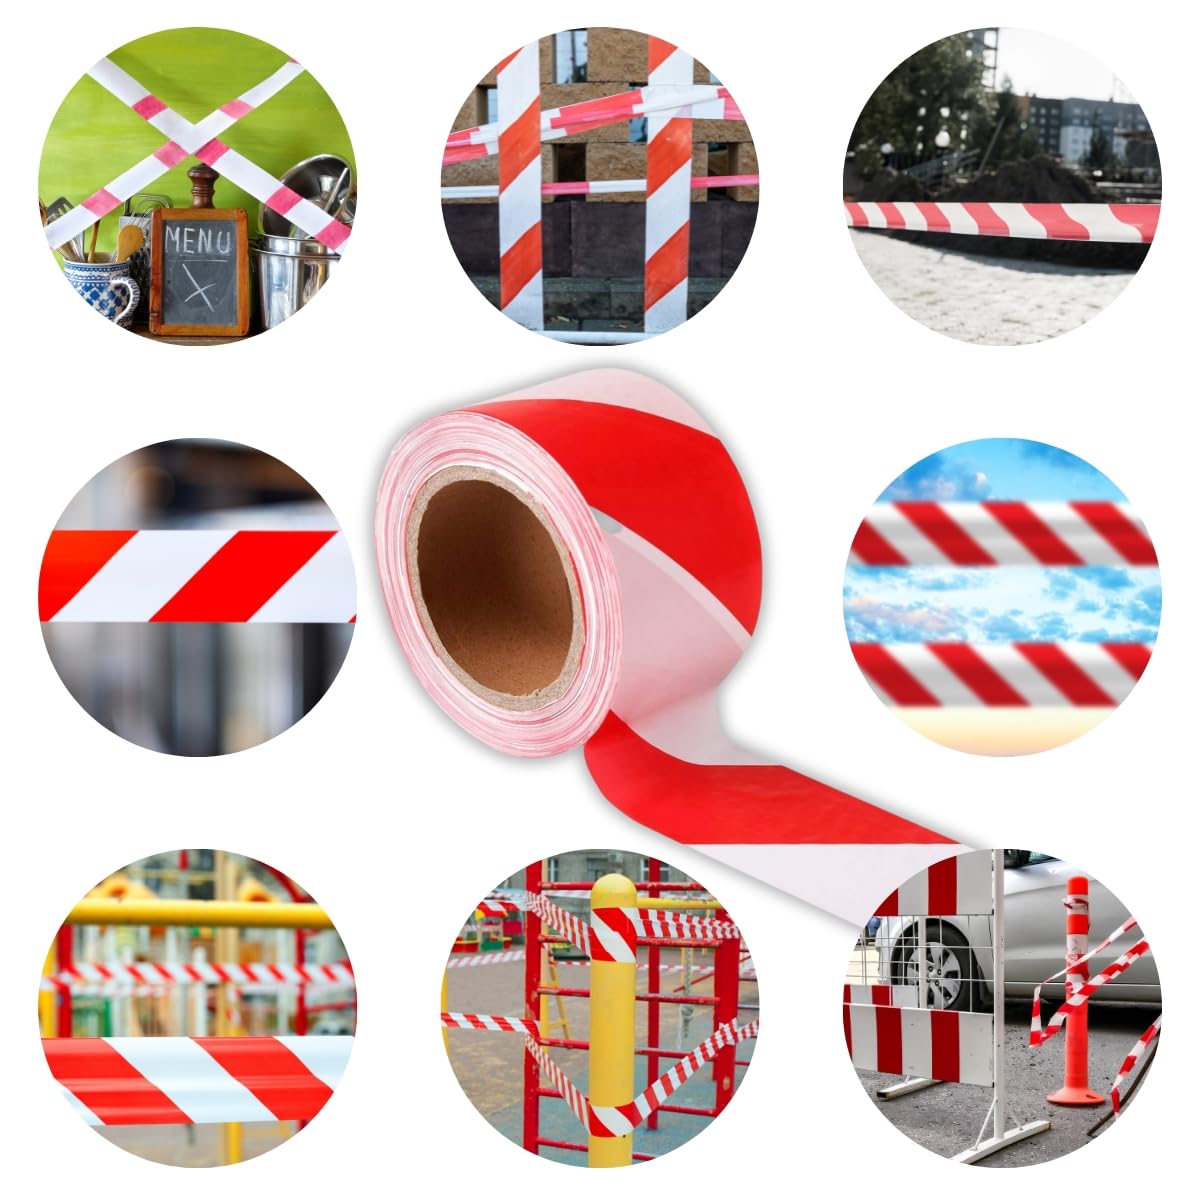 SINGHAL Caution Tape, Red and White Barricading Tape, Warning Tape 3 inch x 250 Meter - Pack of 3